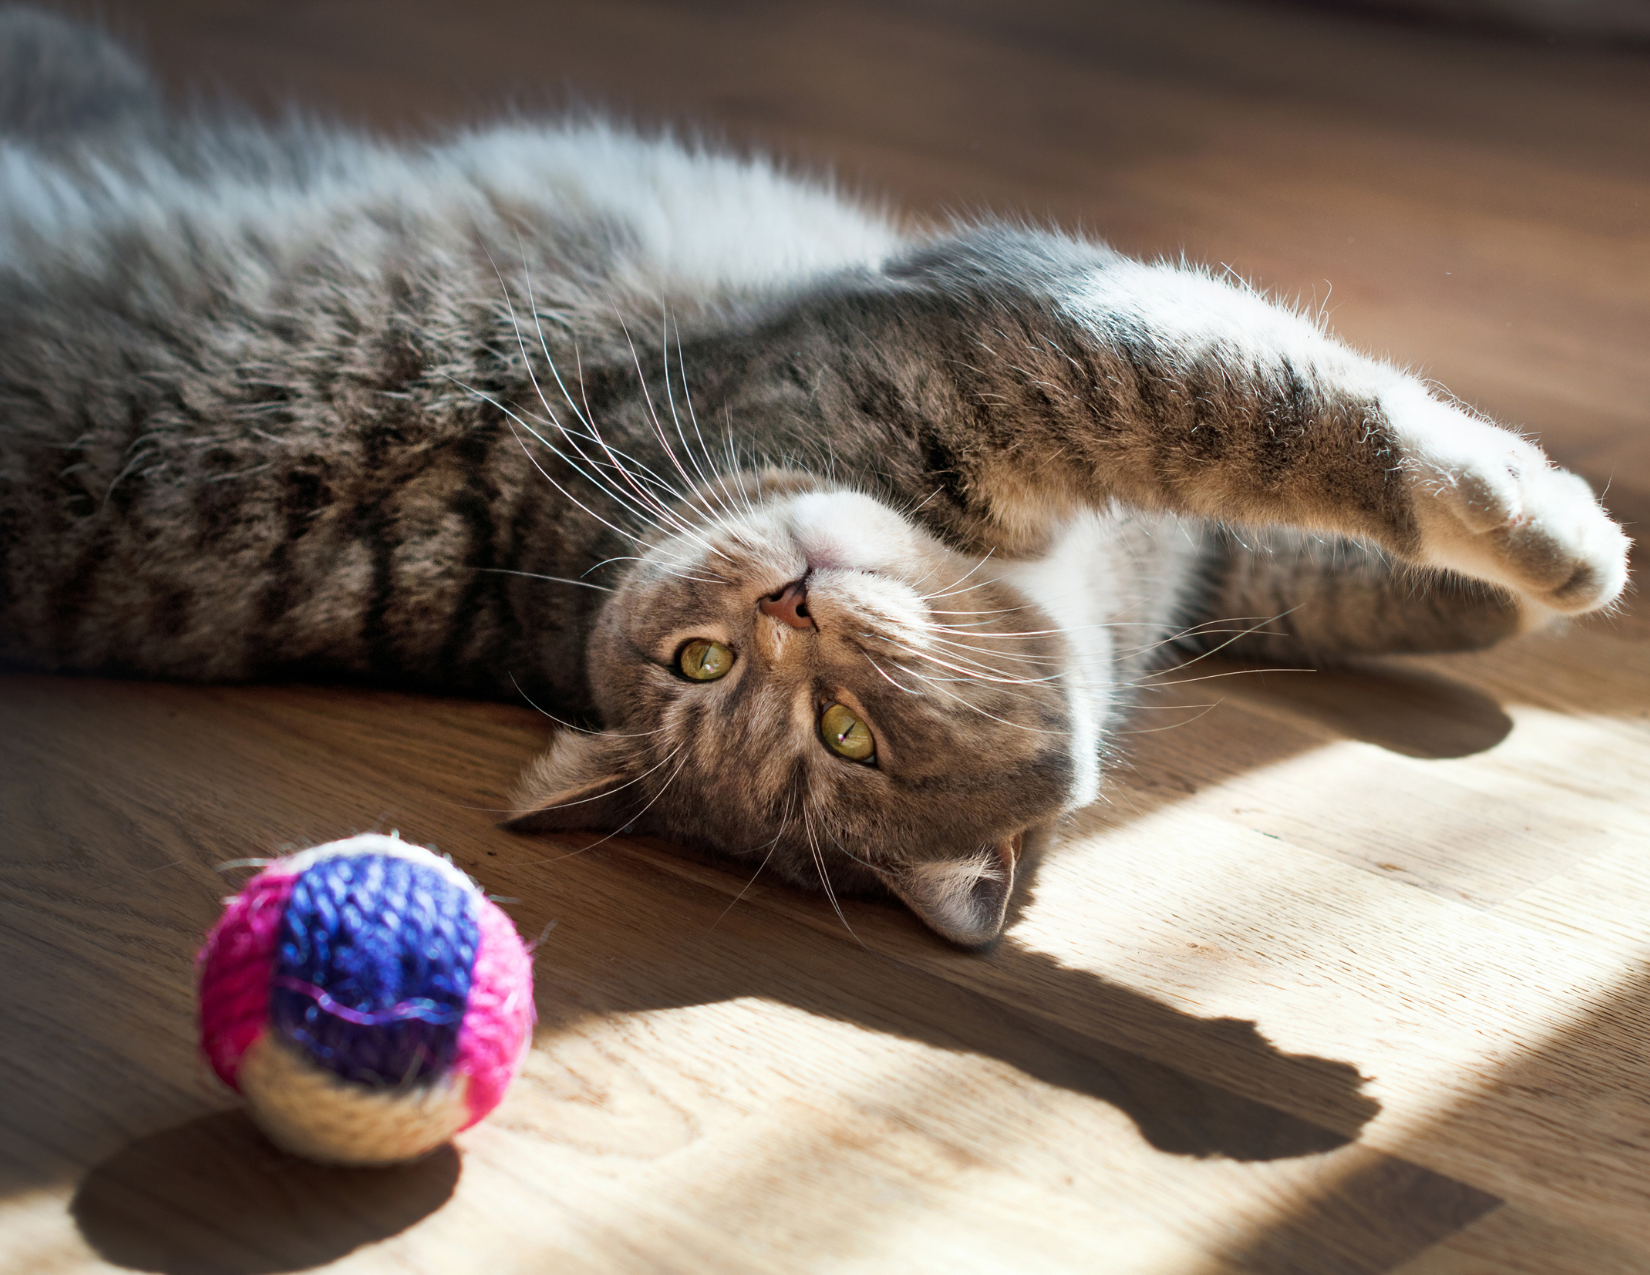 Cat plays with toy.